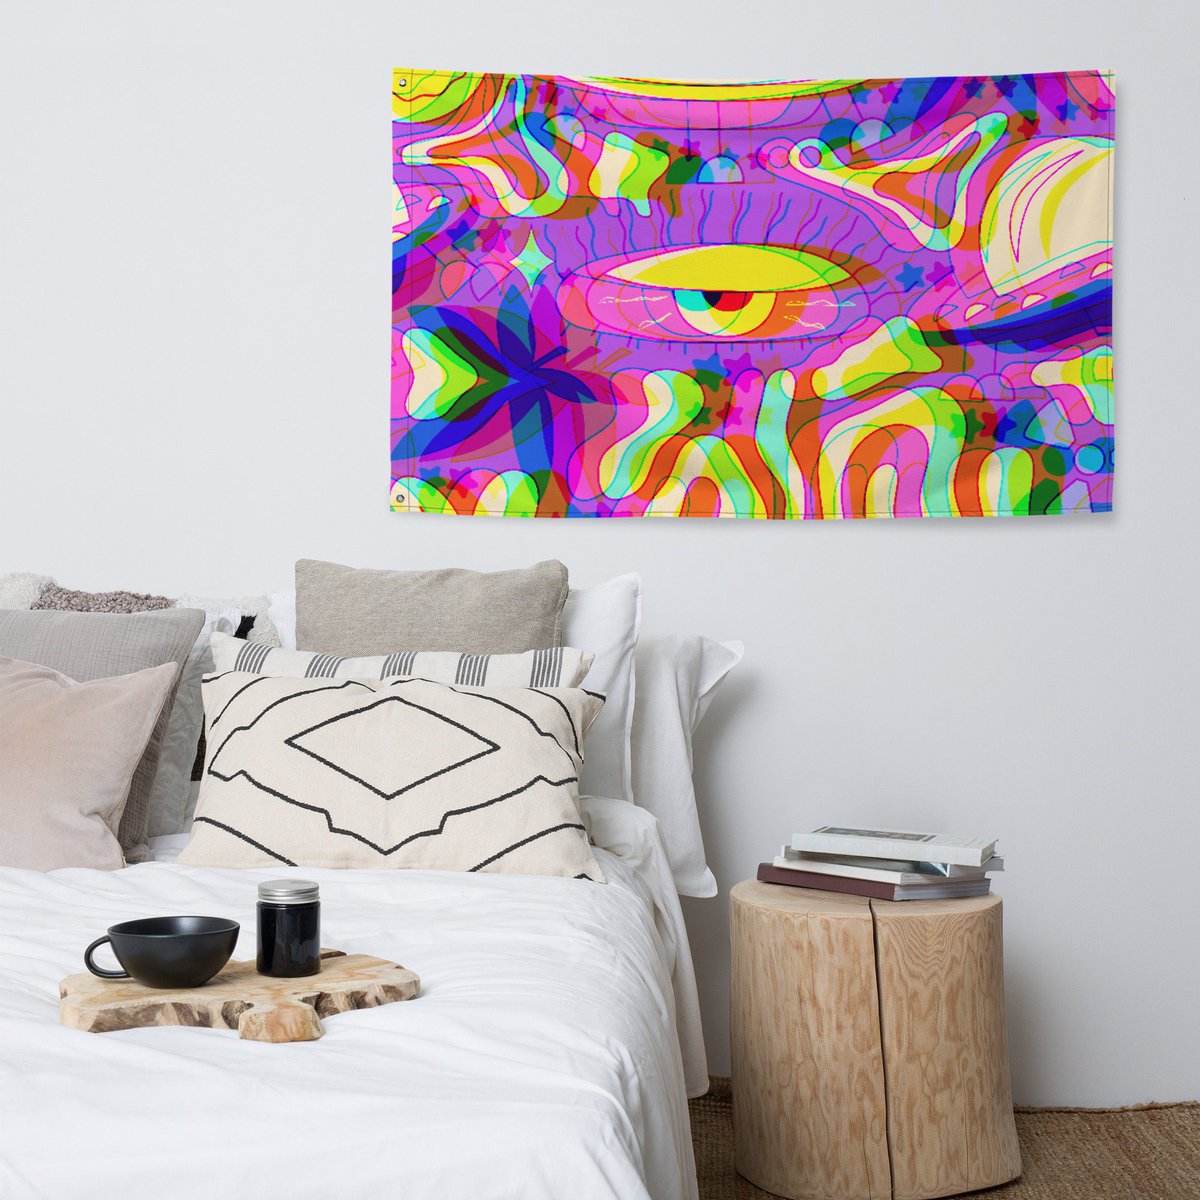 Introducing the Tripster Tapestry👽 Available now. 
etsy.me/4082a3B
#trippyart #trippy #psychedelics #psychedelicart #psychedelic #trippytapestry #tapestry #tapestryart #tapestries